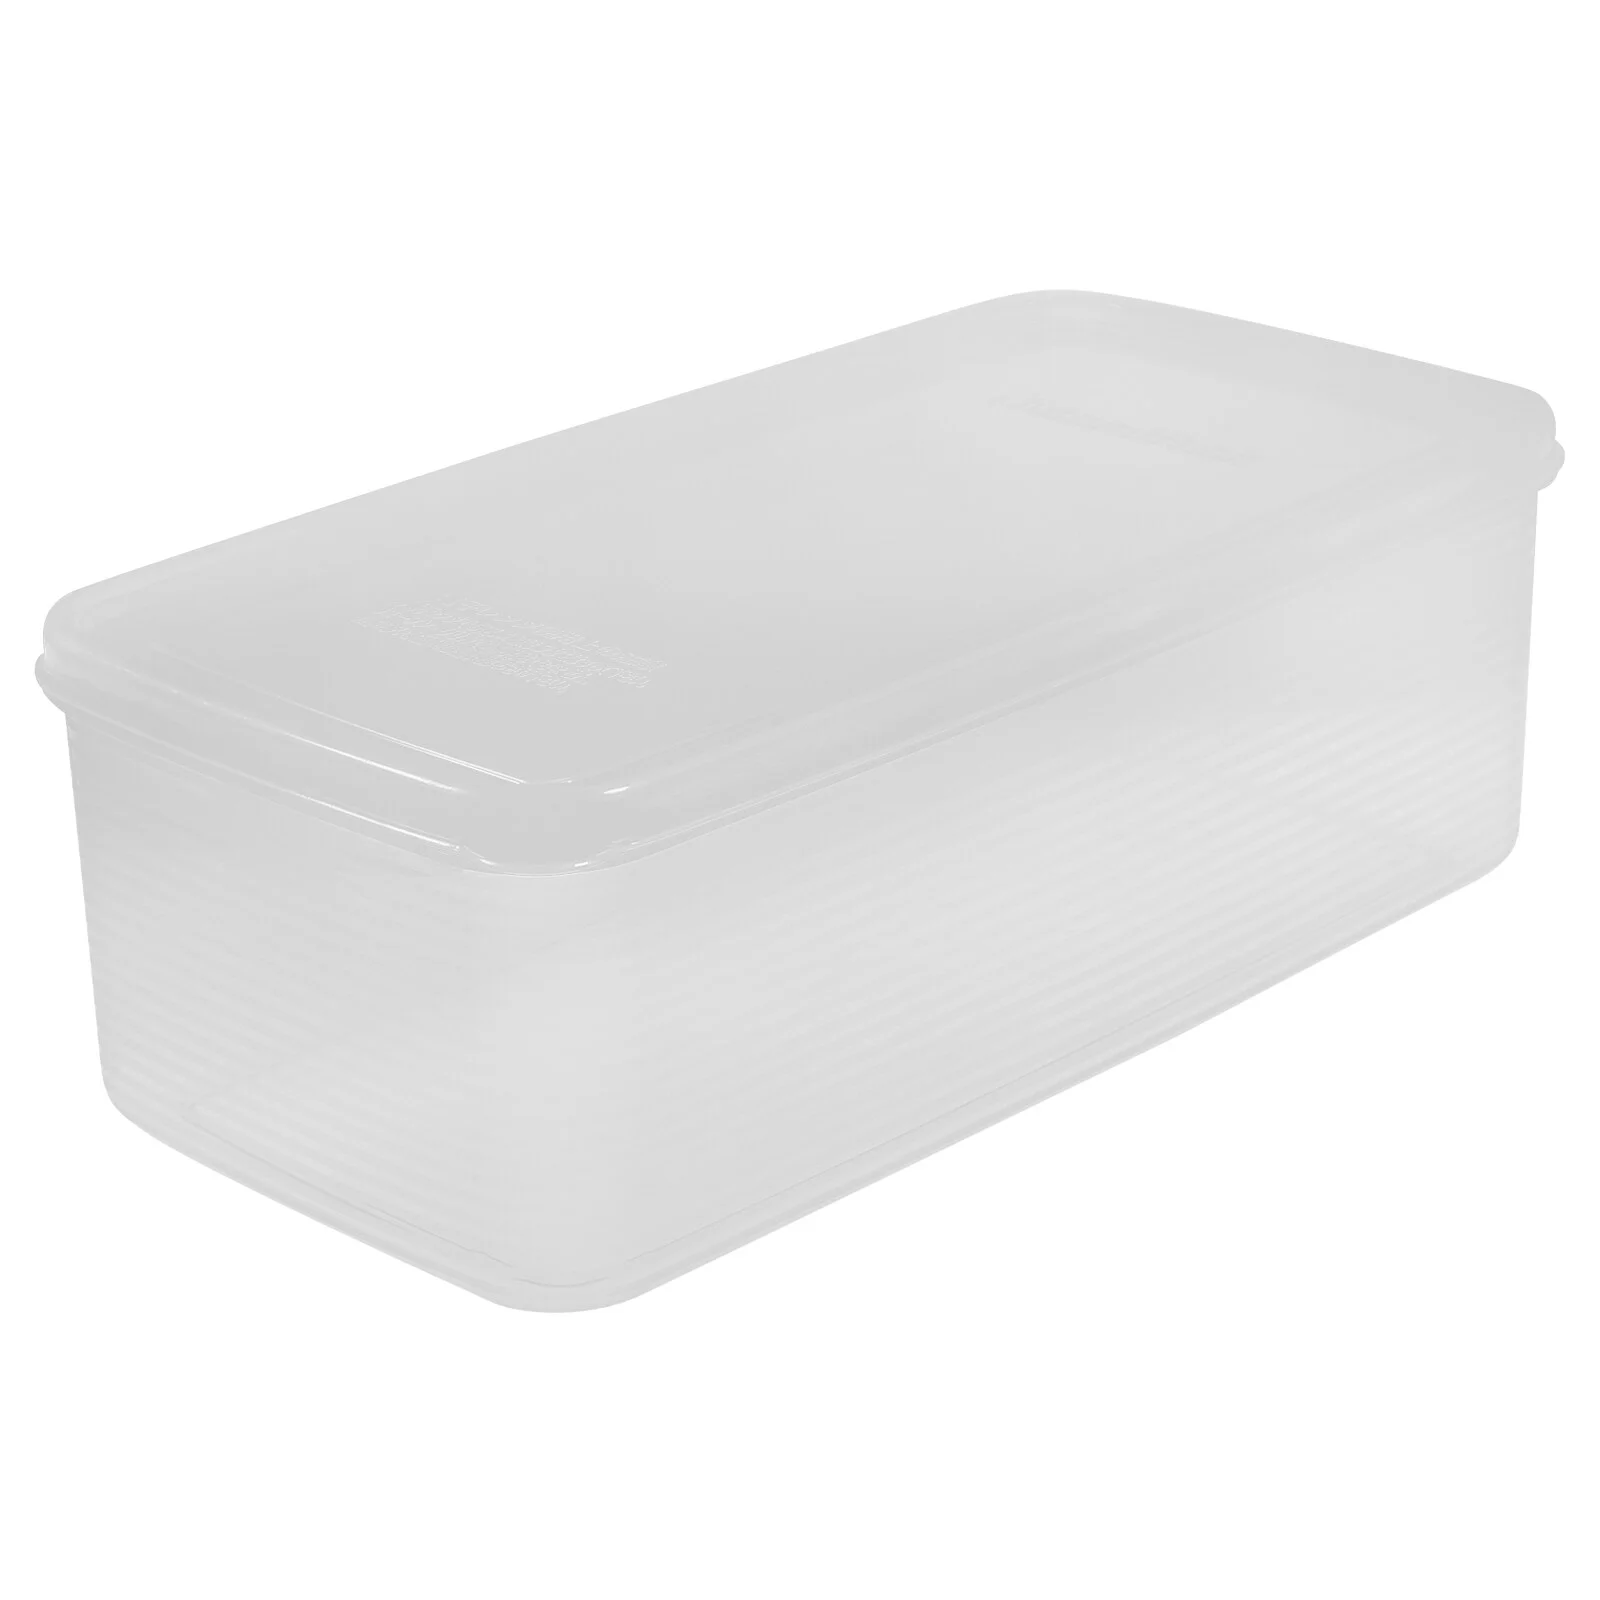 

Clear Container Lid Bread Storage Box Bagel Containers Airtight Loaf Keeper 22X11.5X7.5CM Saver Homemade Transparent Pp